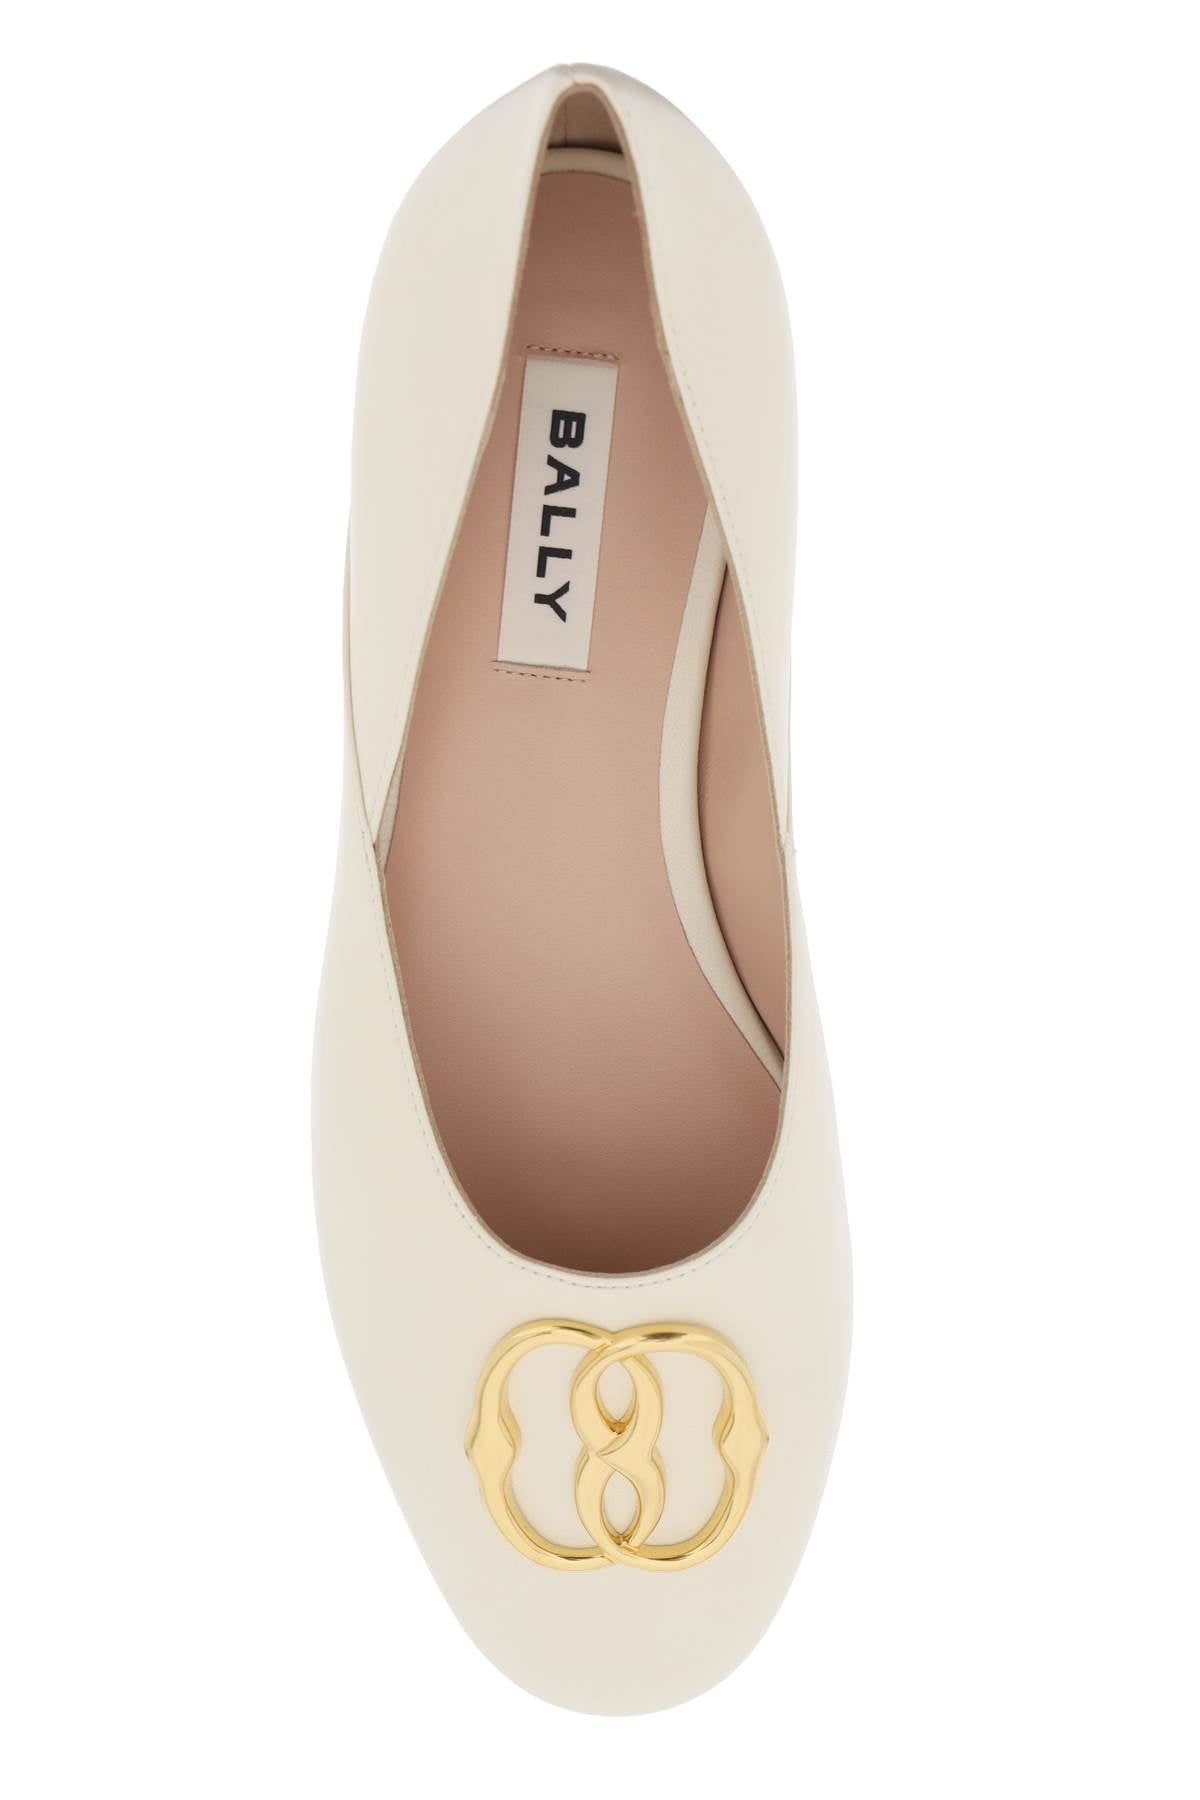 BALLY Elegant White Leather Ballet Flats for Every Occasion